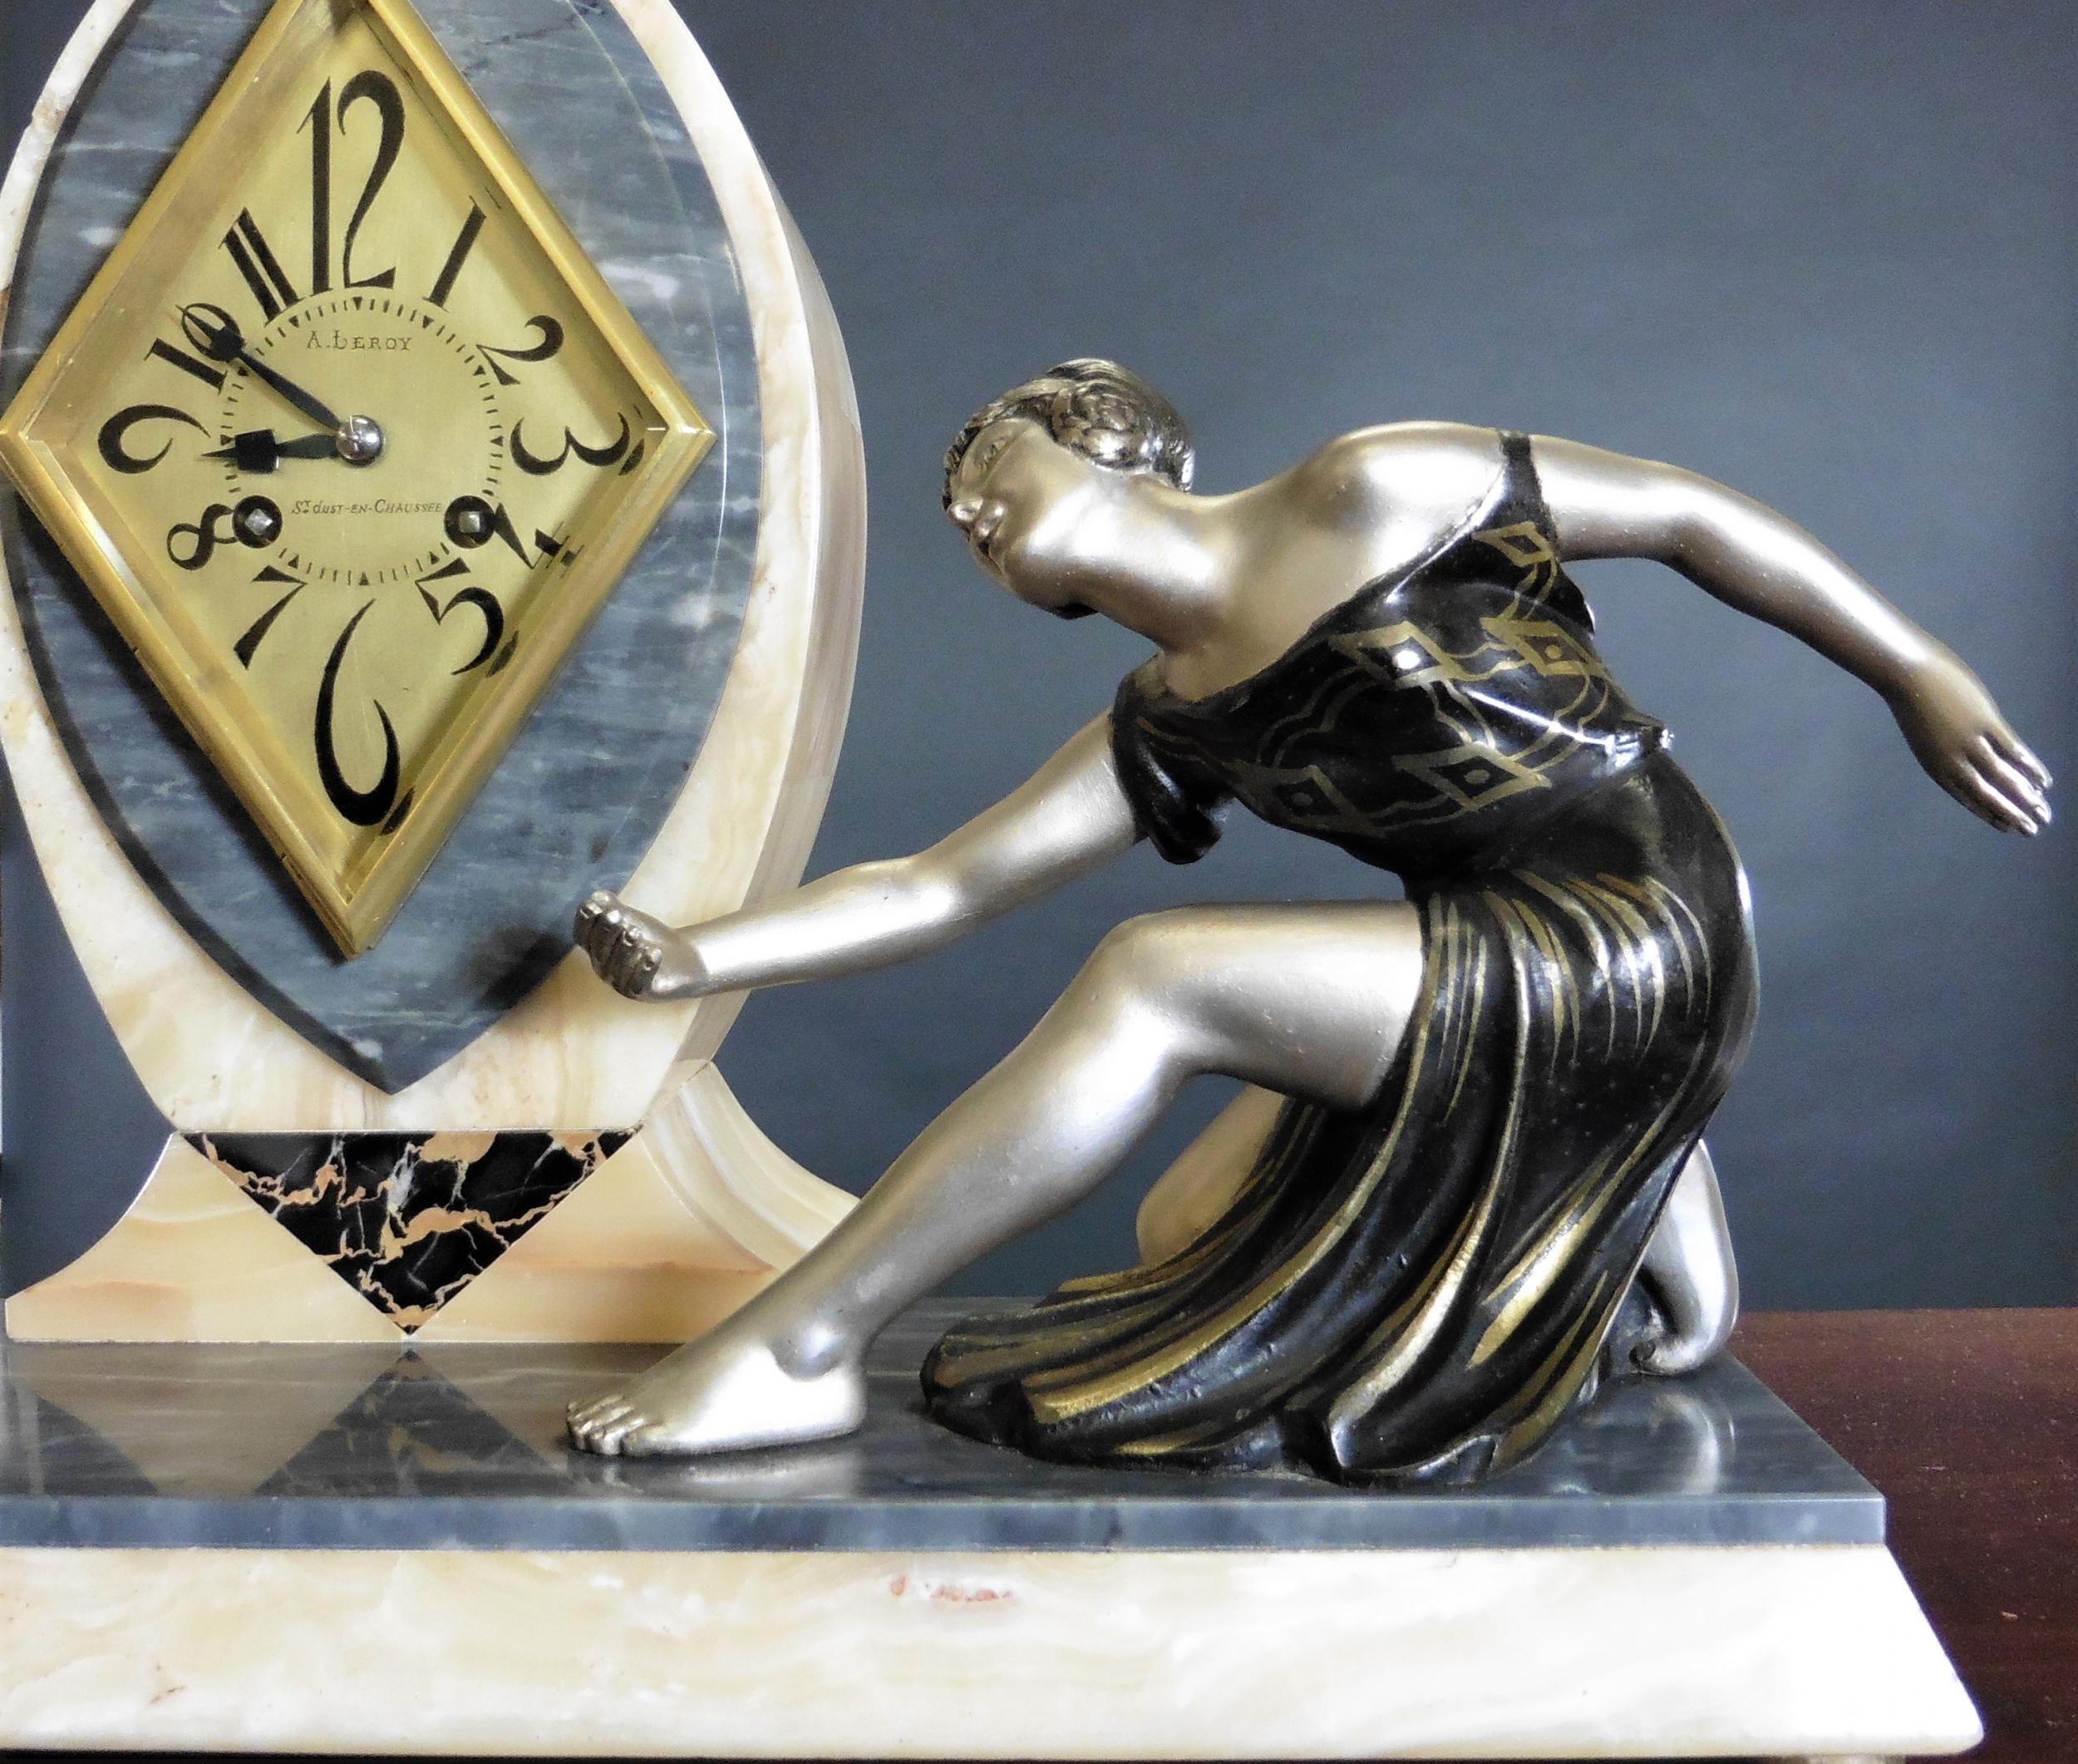 Art Deco mantel clock

Art Deco mantel clock standing on a cream and grey marble base resting on four brass bun feet supporting an ovoid shaped top housing a gilded diamond shaped bezel.

Gilded dial with Art Deco style numerals and original Art